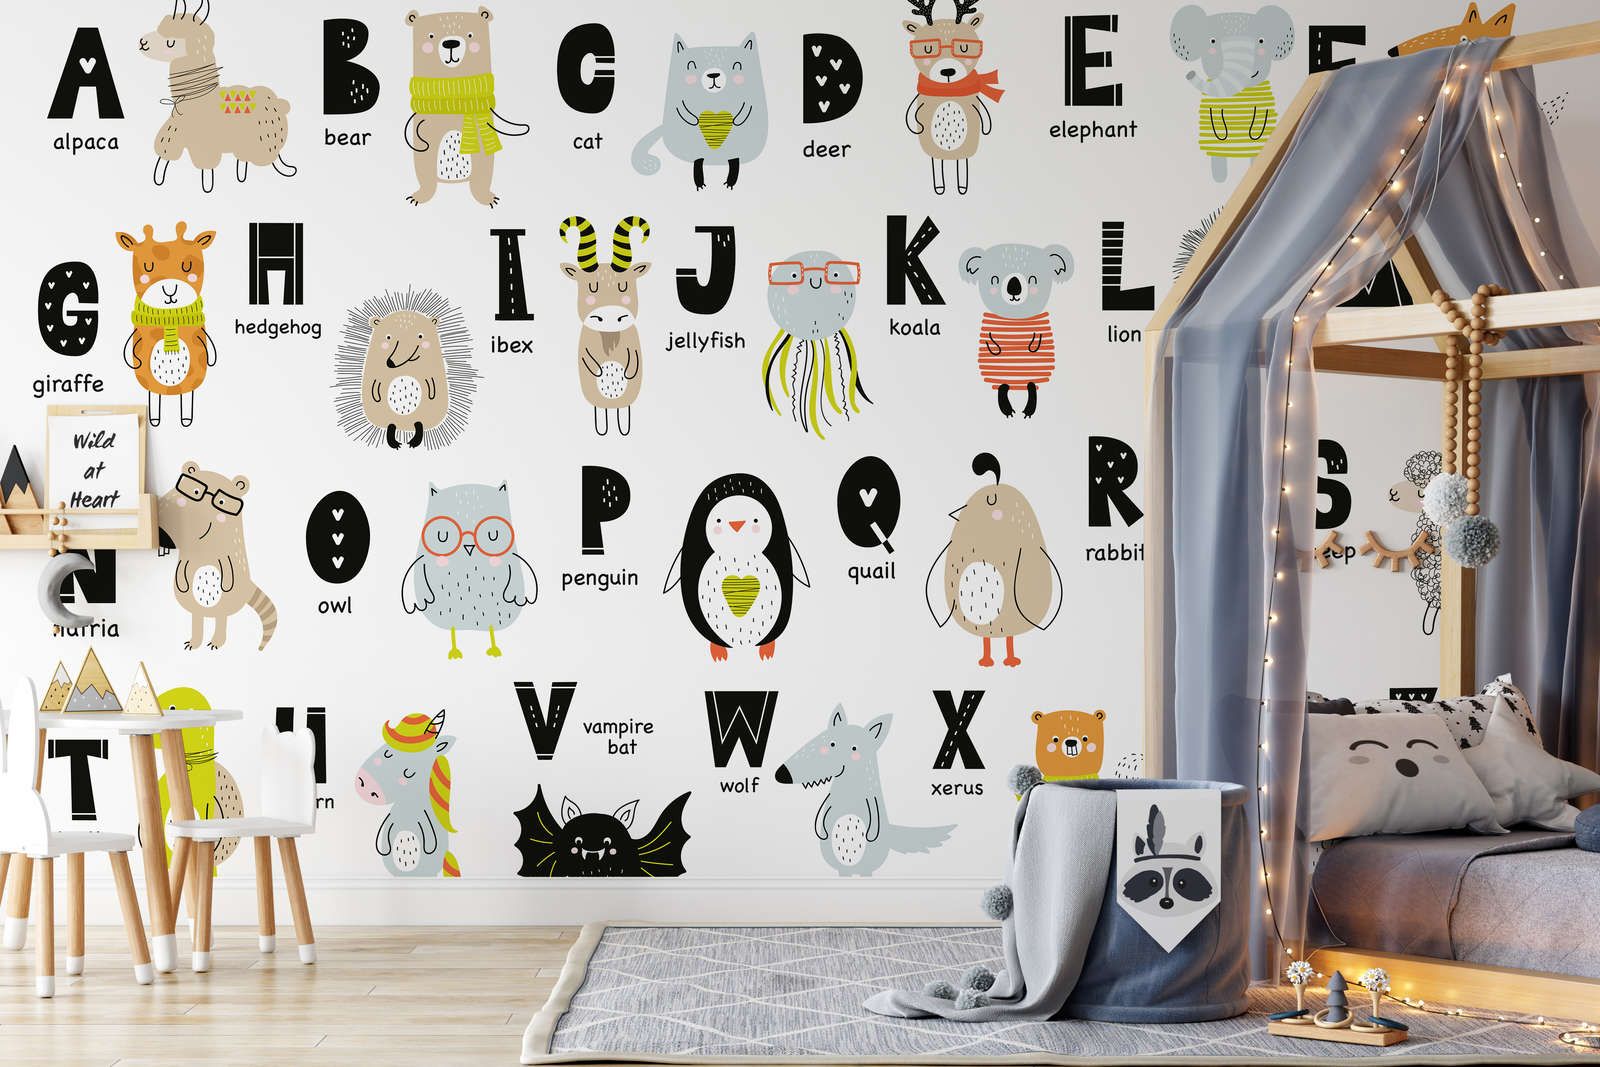             Photo wallpaper Alphabet with animals and animal names - Smooth & slightly shiny non-woven
        